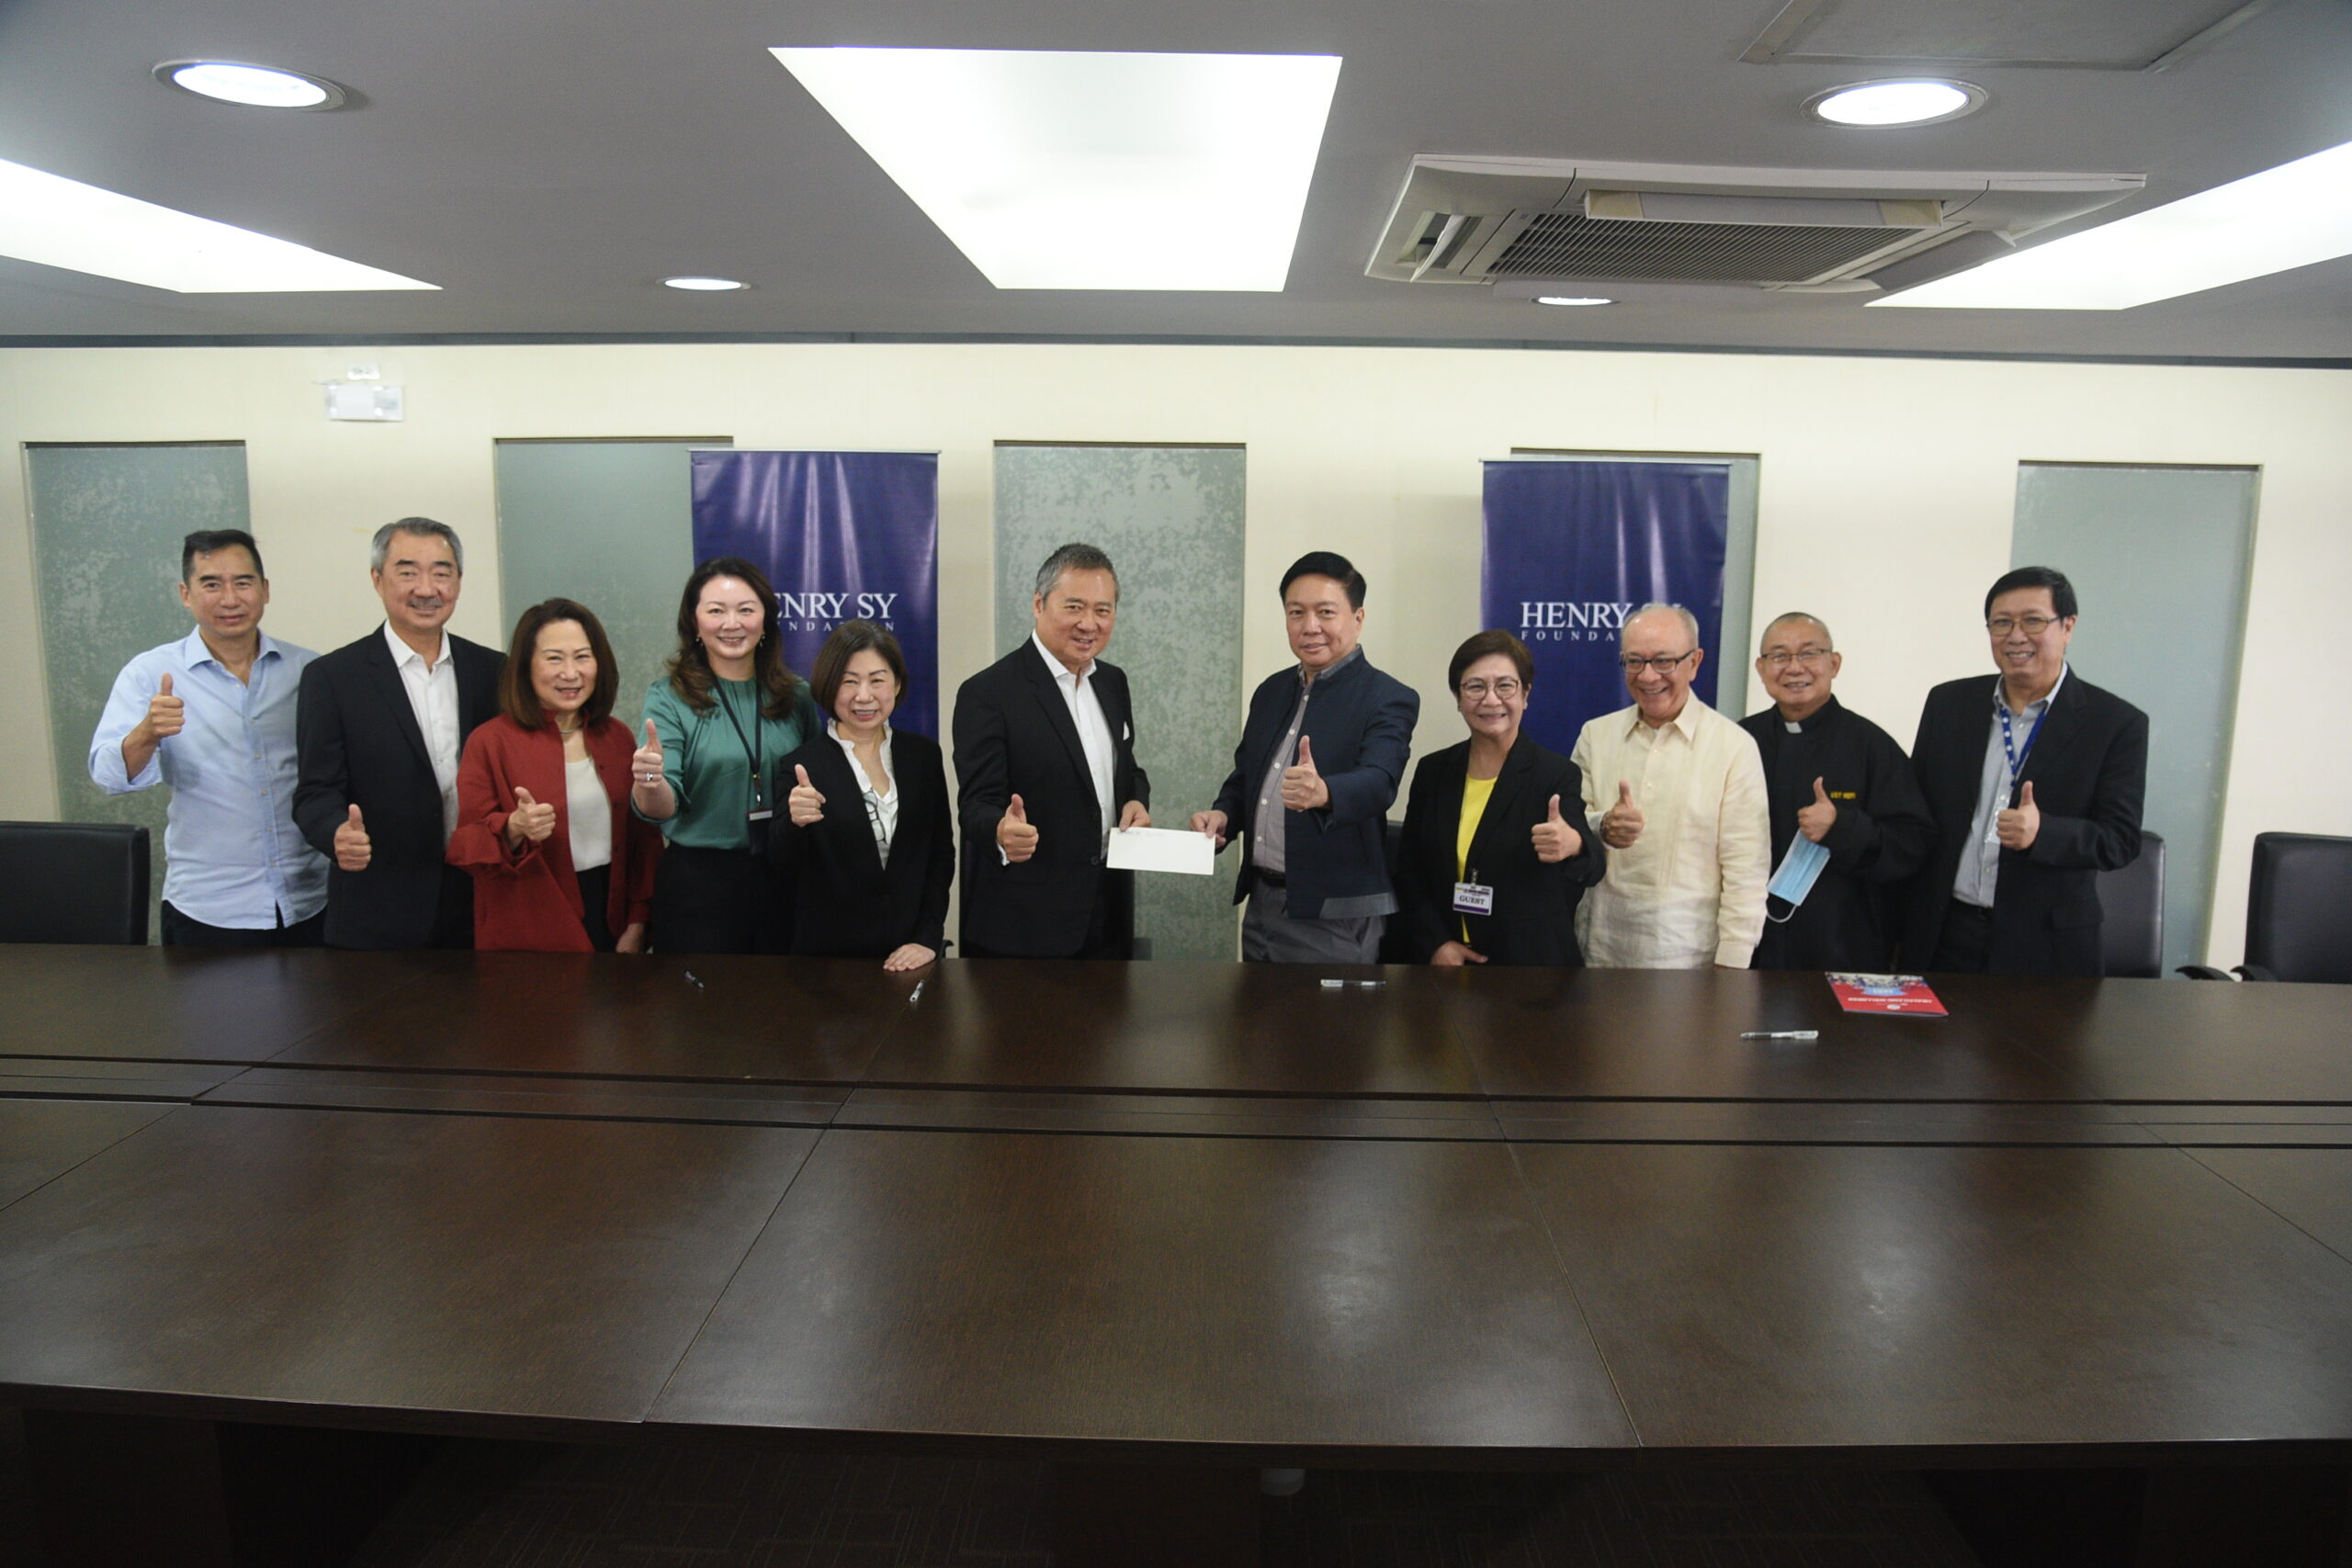 Leaders of Henry Sy Foundation Inc. (HSFI), led by the Sy family (L-R: Harley Sy, Hans Sy, Elizabeth Sy, Debbie Sy, Tessie Sy, Henry Sy Jr, Engr. Ramon Gil Macapagal (extreme right)) , formalize its partnership with the University of Sto. Tomas (L-R: UST Rector Fr. Richard Gaw Ang, OP, Dr. Ma. Lourdes Domingo, Fr. Angel Aparicio, OP, Fr. Maximo Gatela, OP)